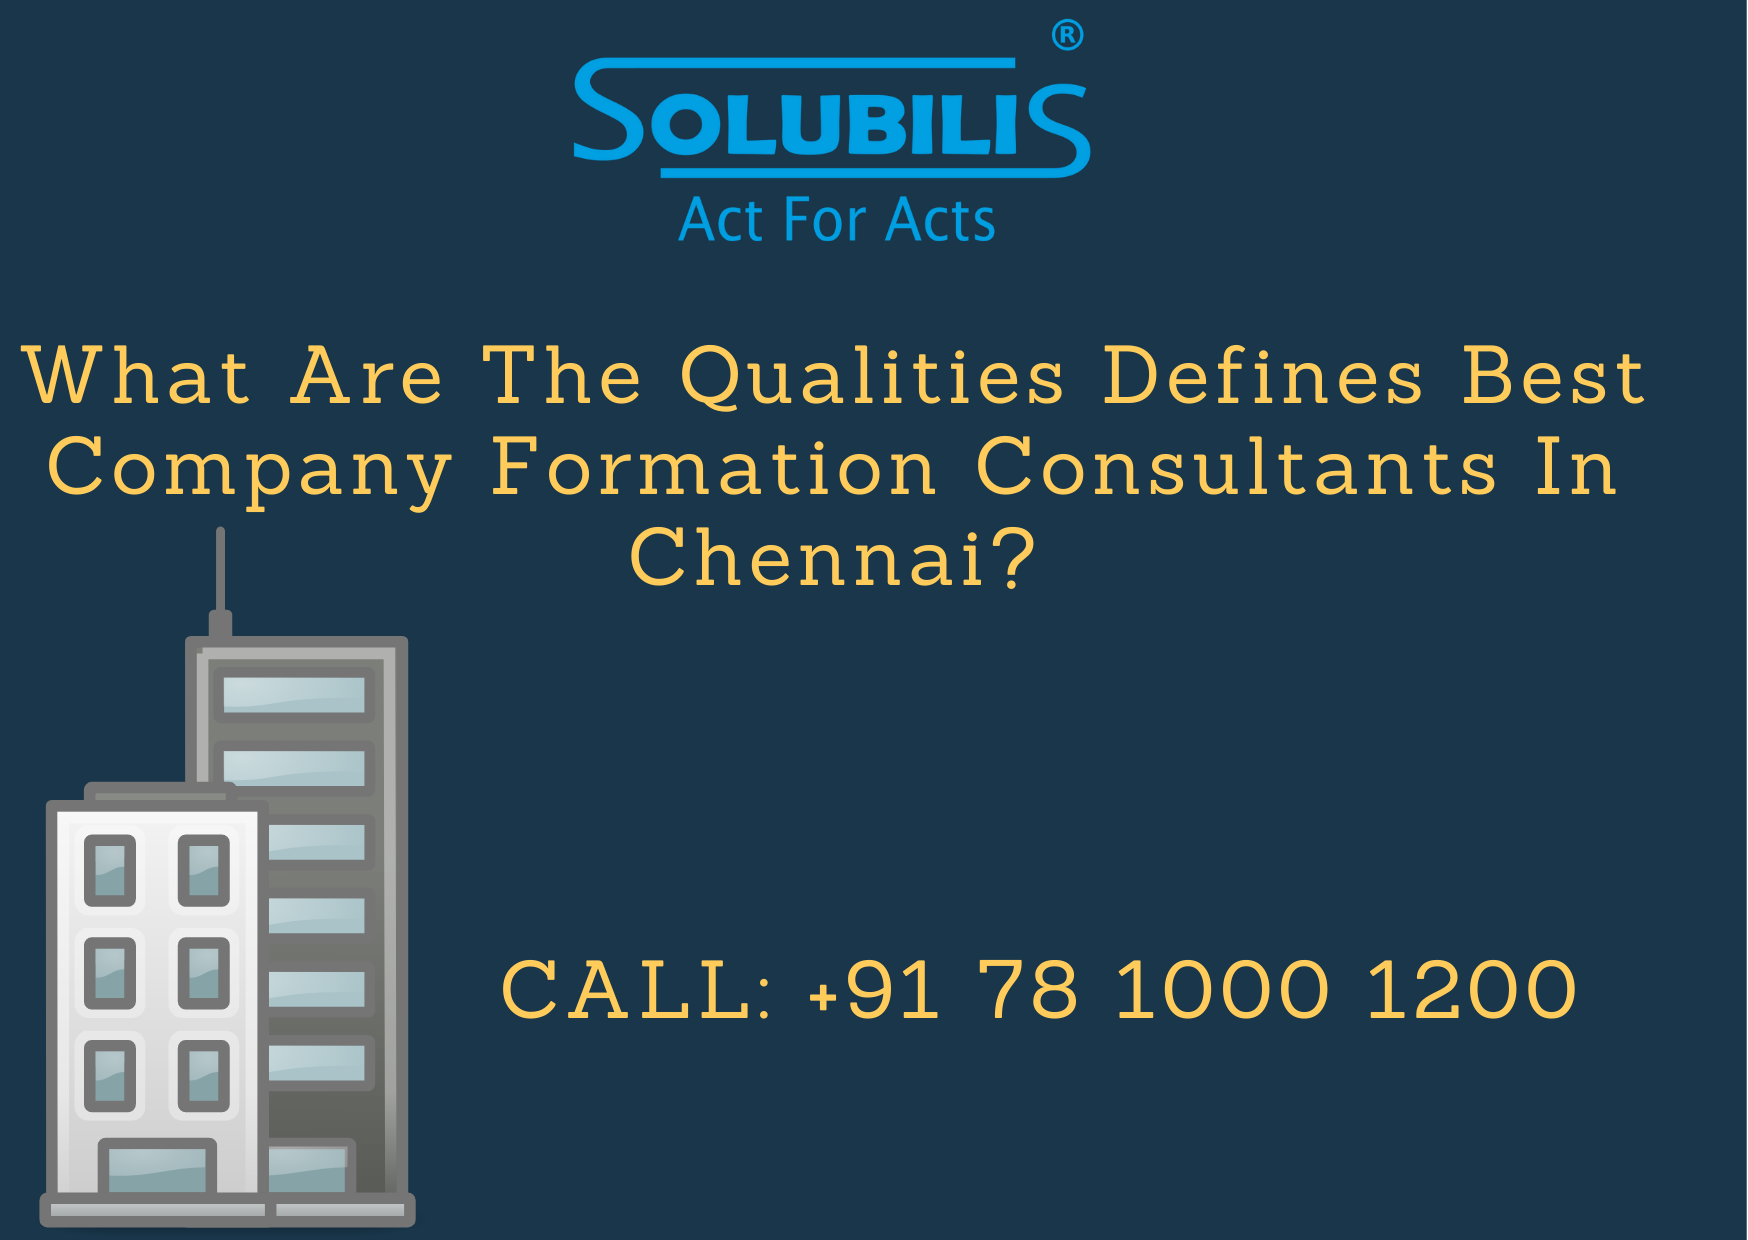 Company Formation Consultants In Chennai